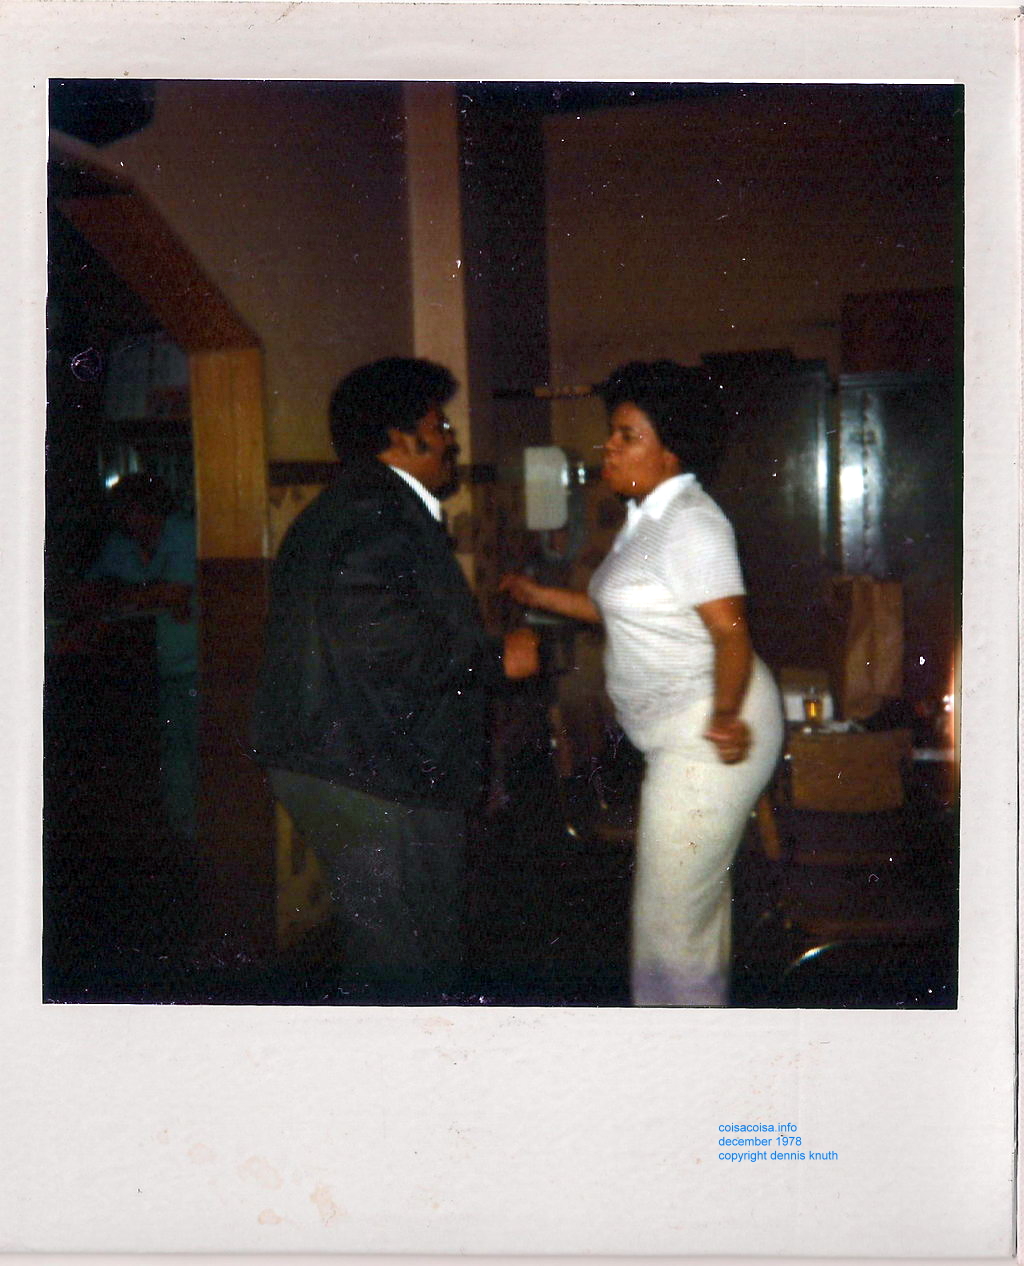 Chester Cavil and wife Yvonne dancing